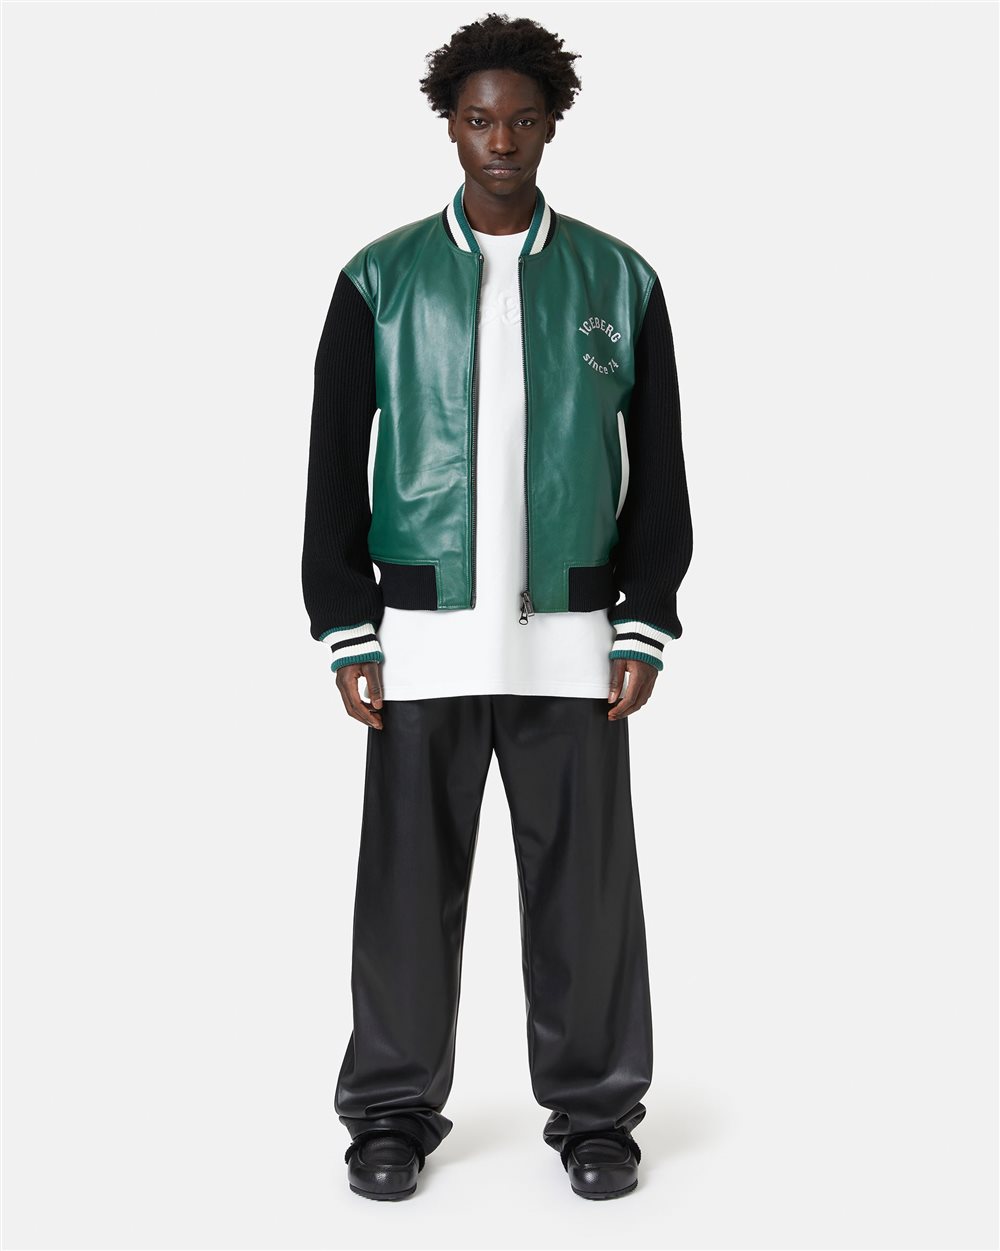 Leather bomber jacket with logo - Iceberg - Official Website